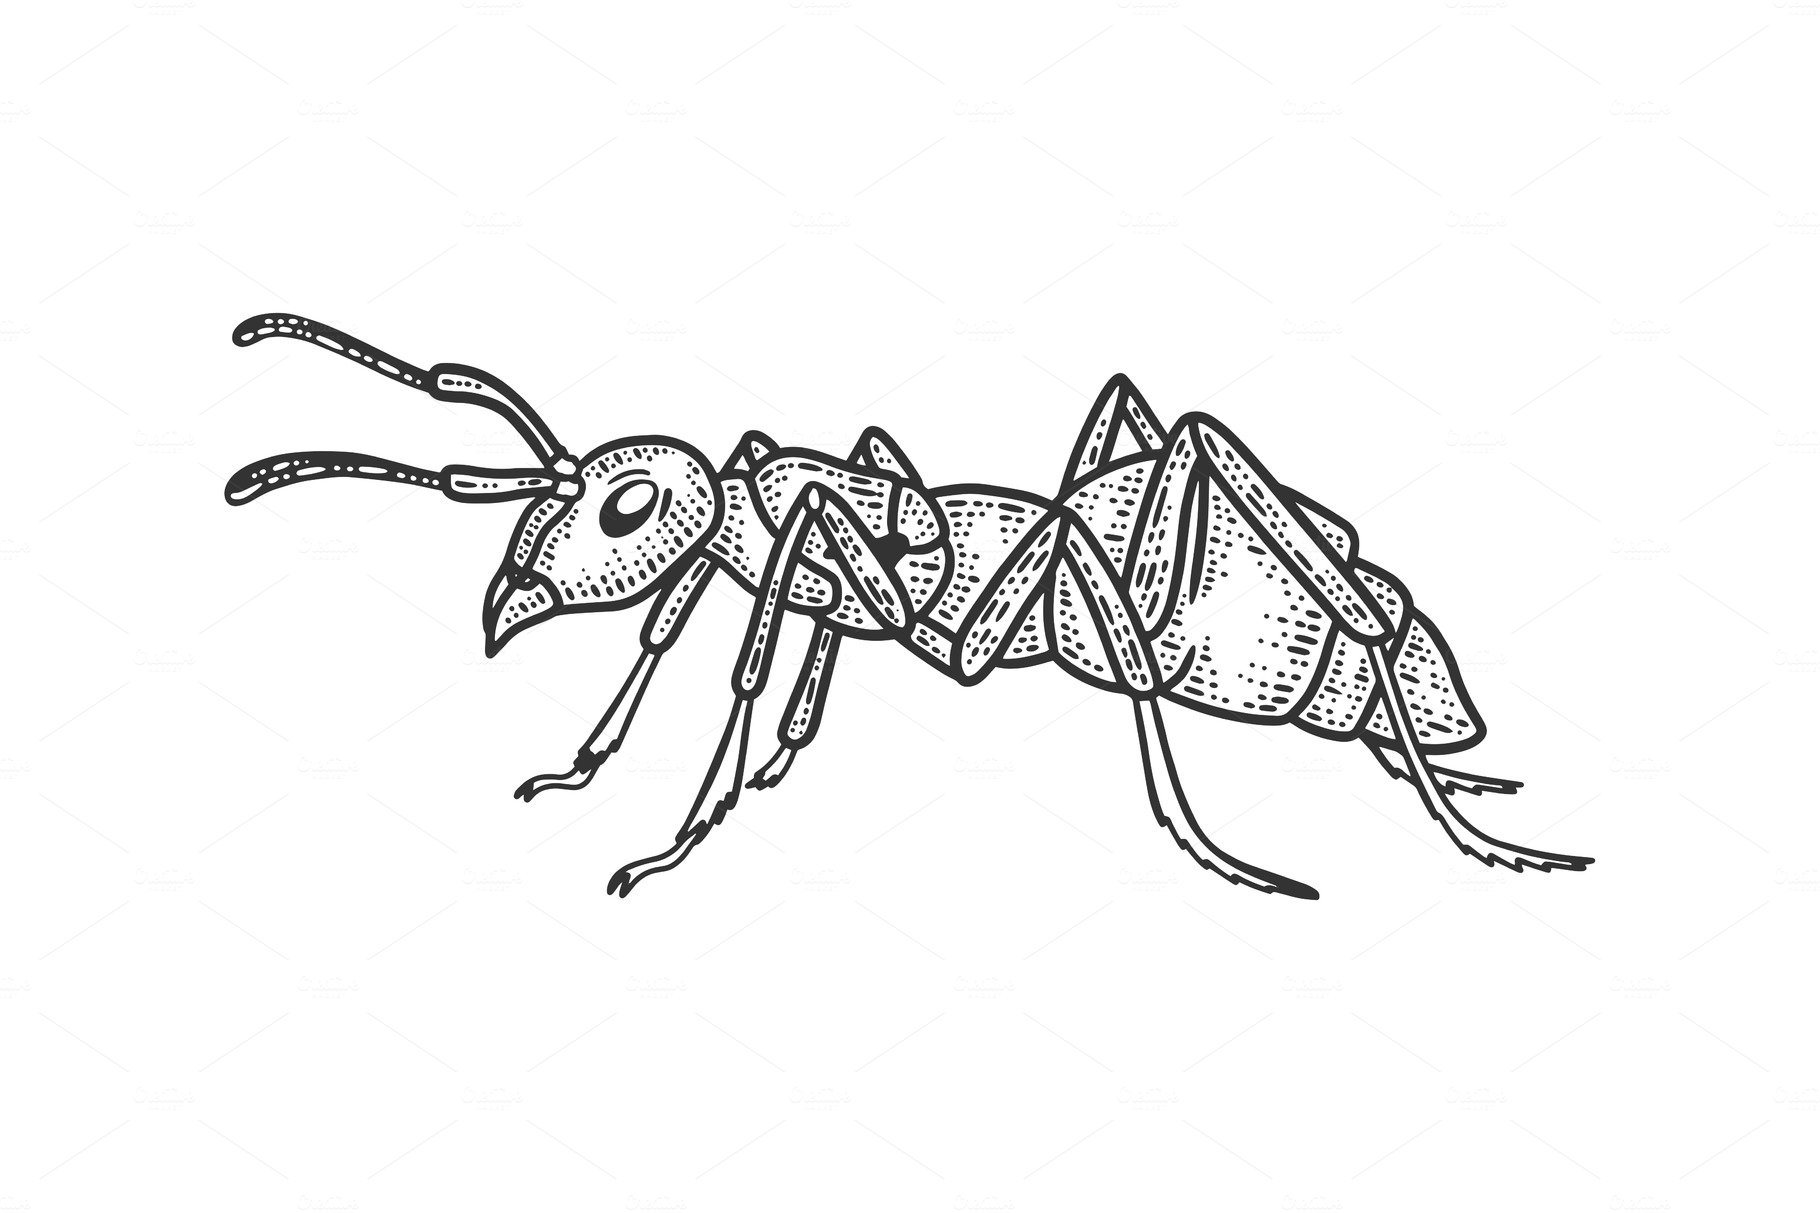 Ant insect sketch vector cover image.